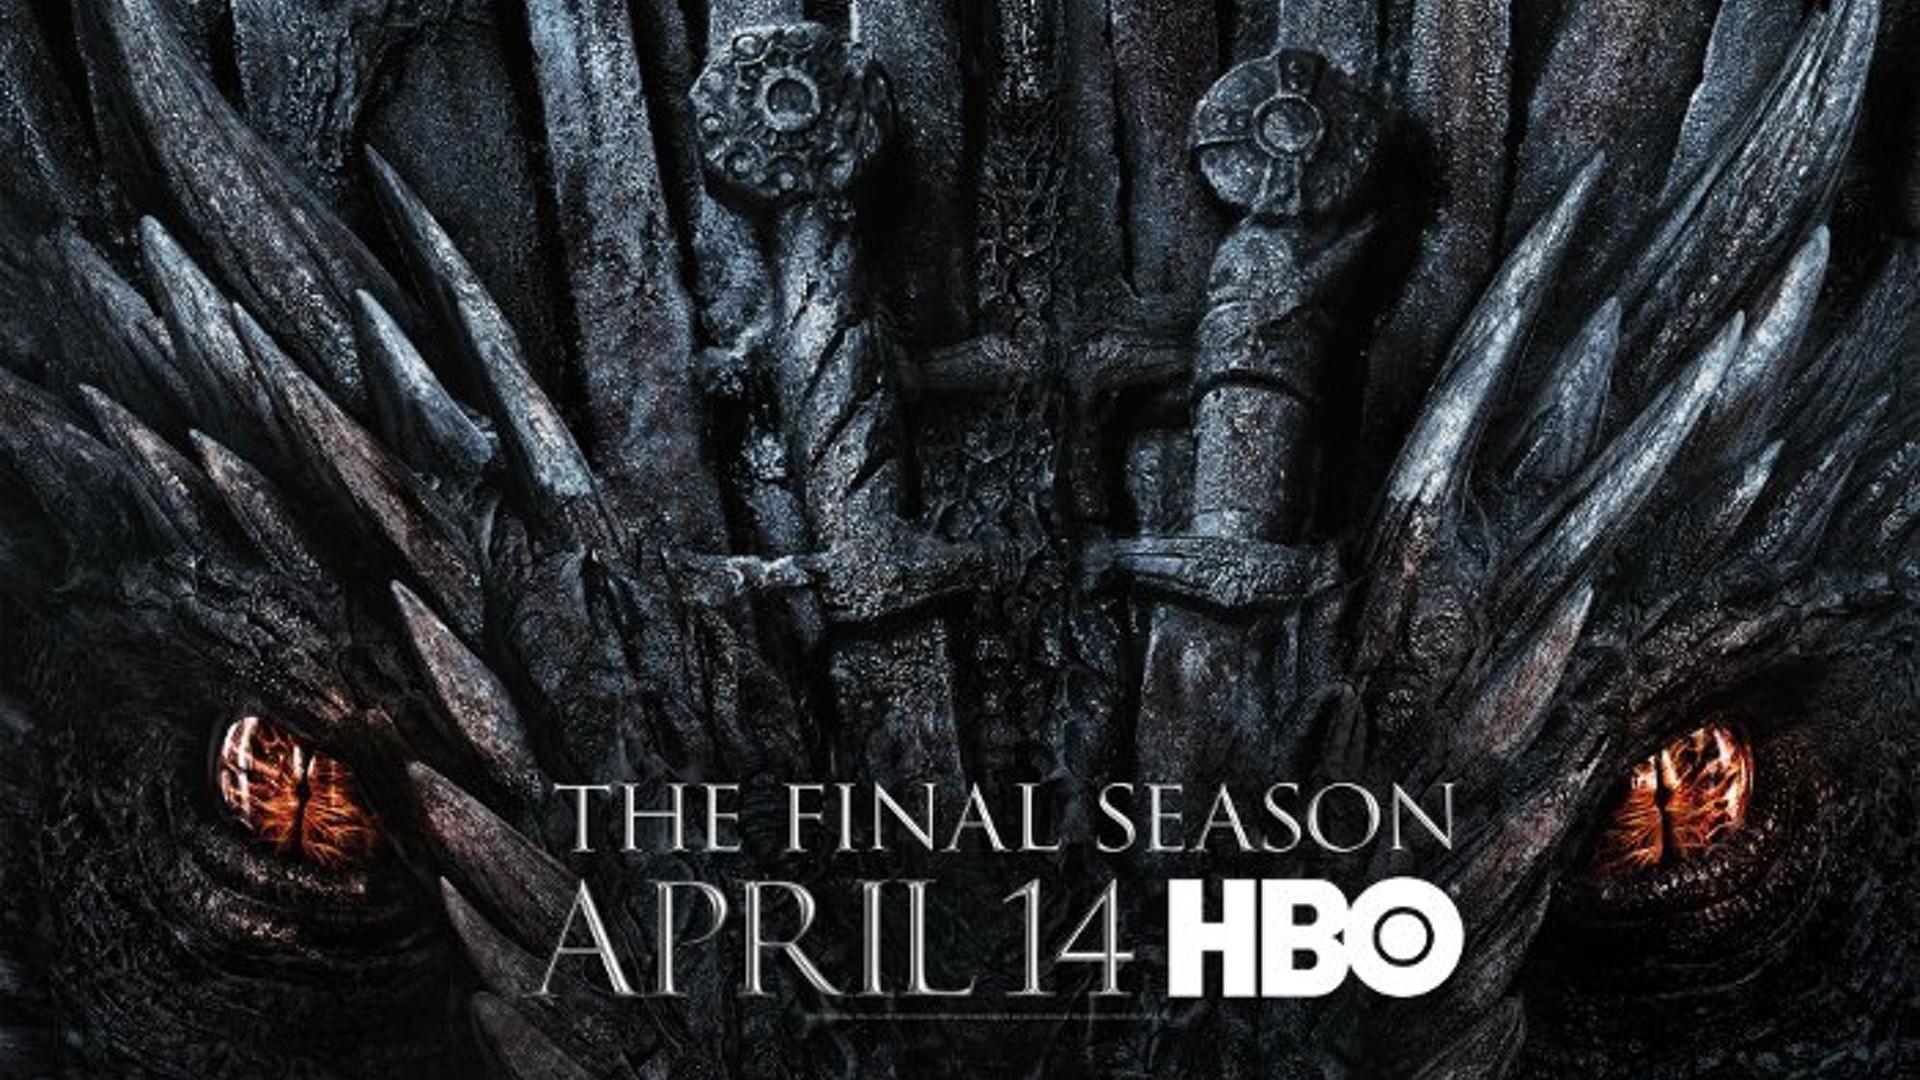 New Poster for GAME OF THRONES Season 8 Features a Dragon